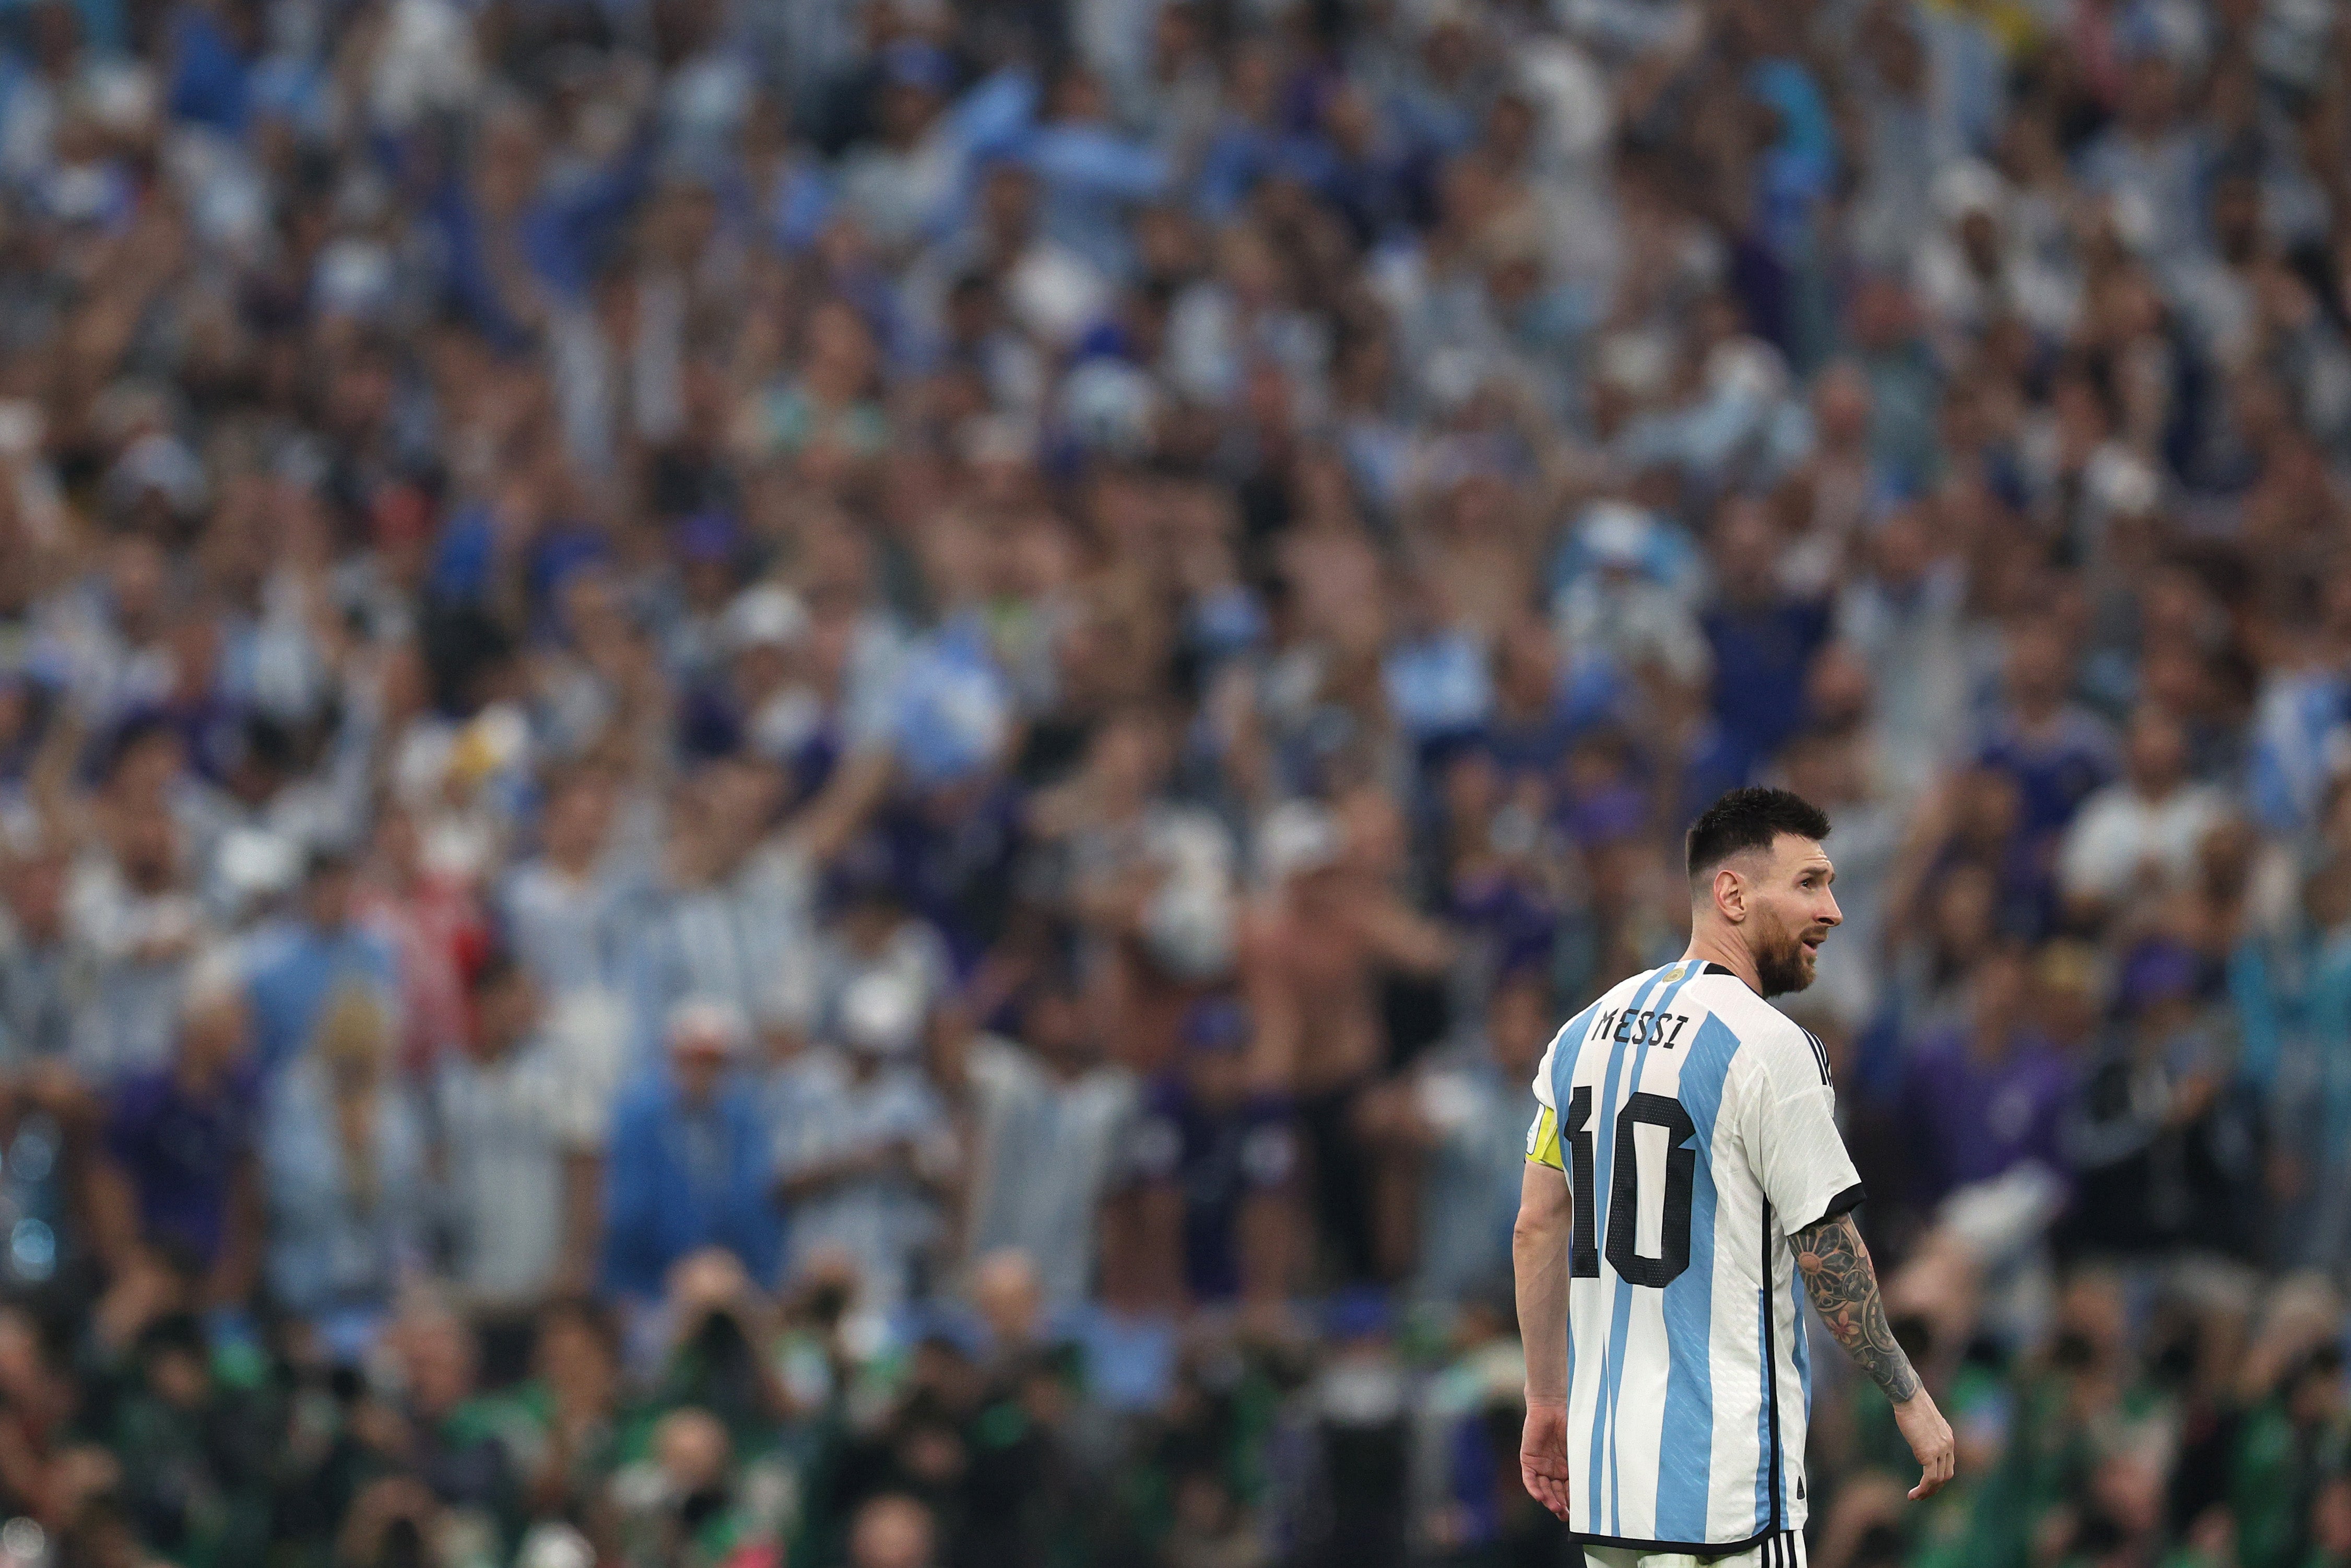 Fans watch on as Lionel Messi plays in the World Cup semi-final